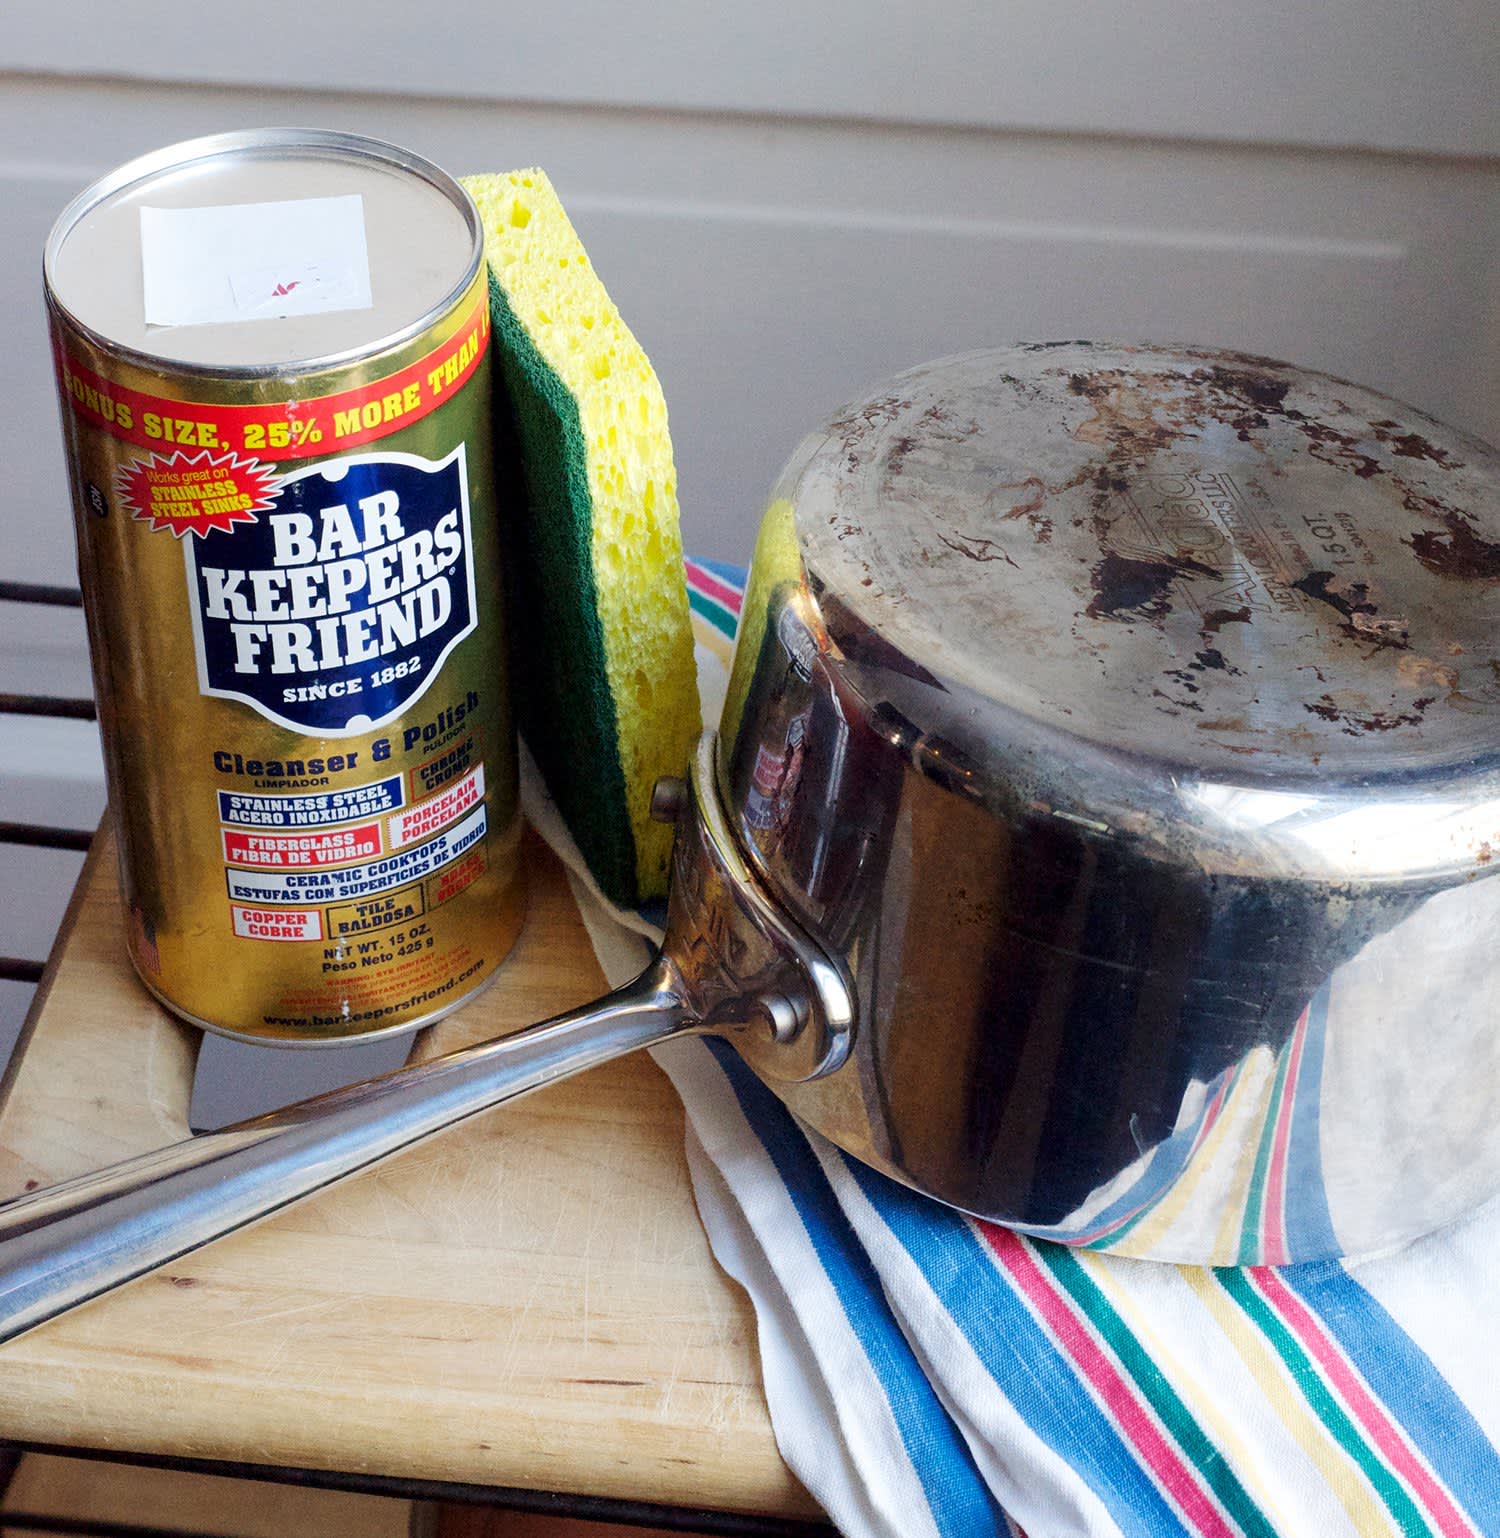 best way to clean a stainless steel pan